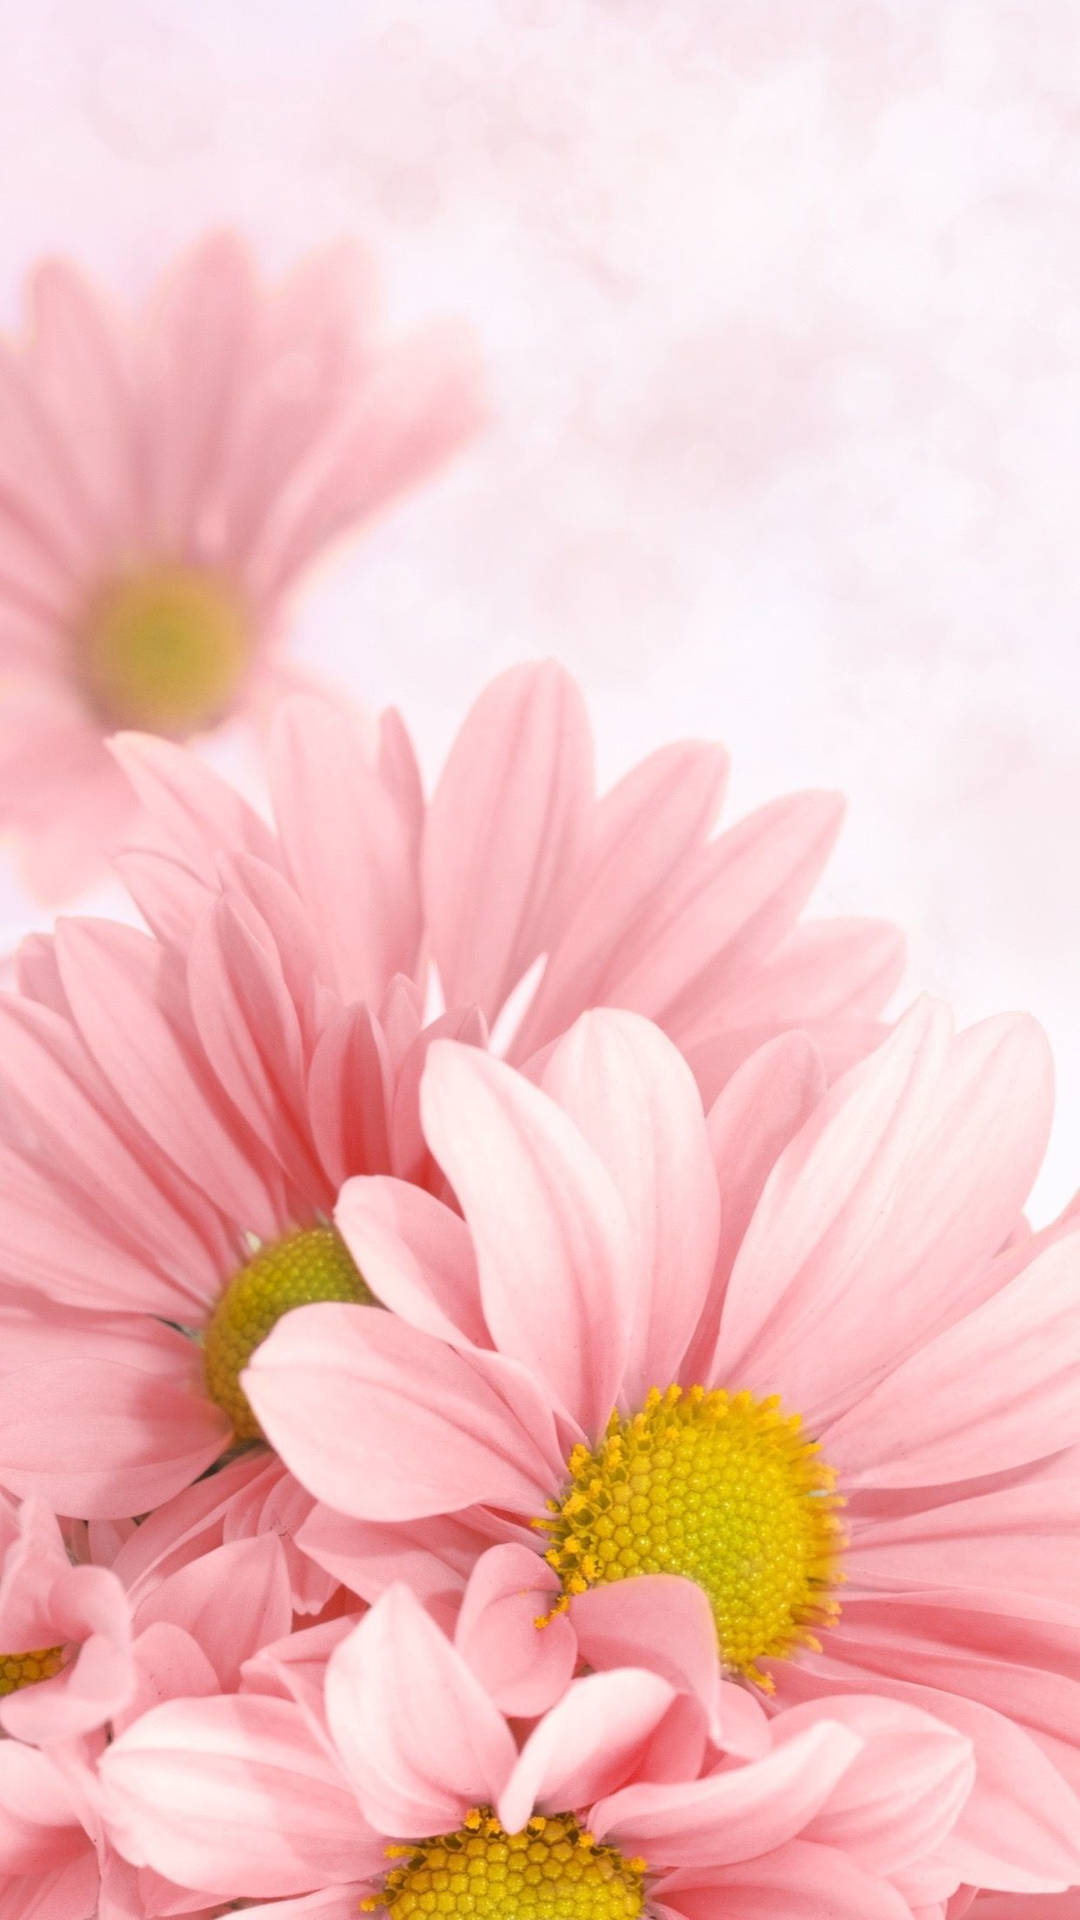 Vibrant Pink Daisy On A Smartphone Background